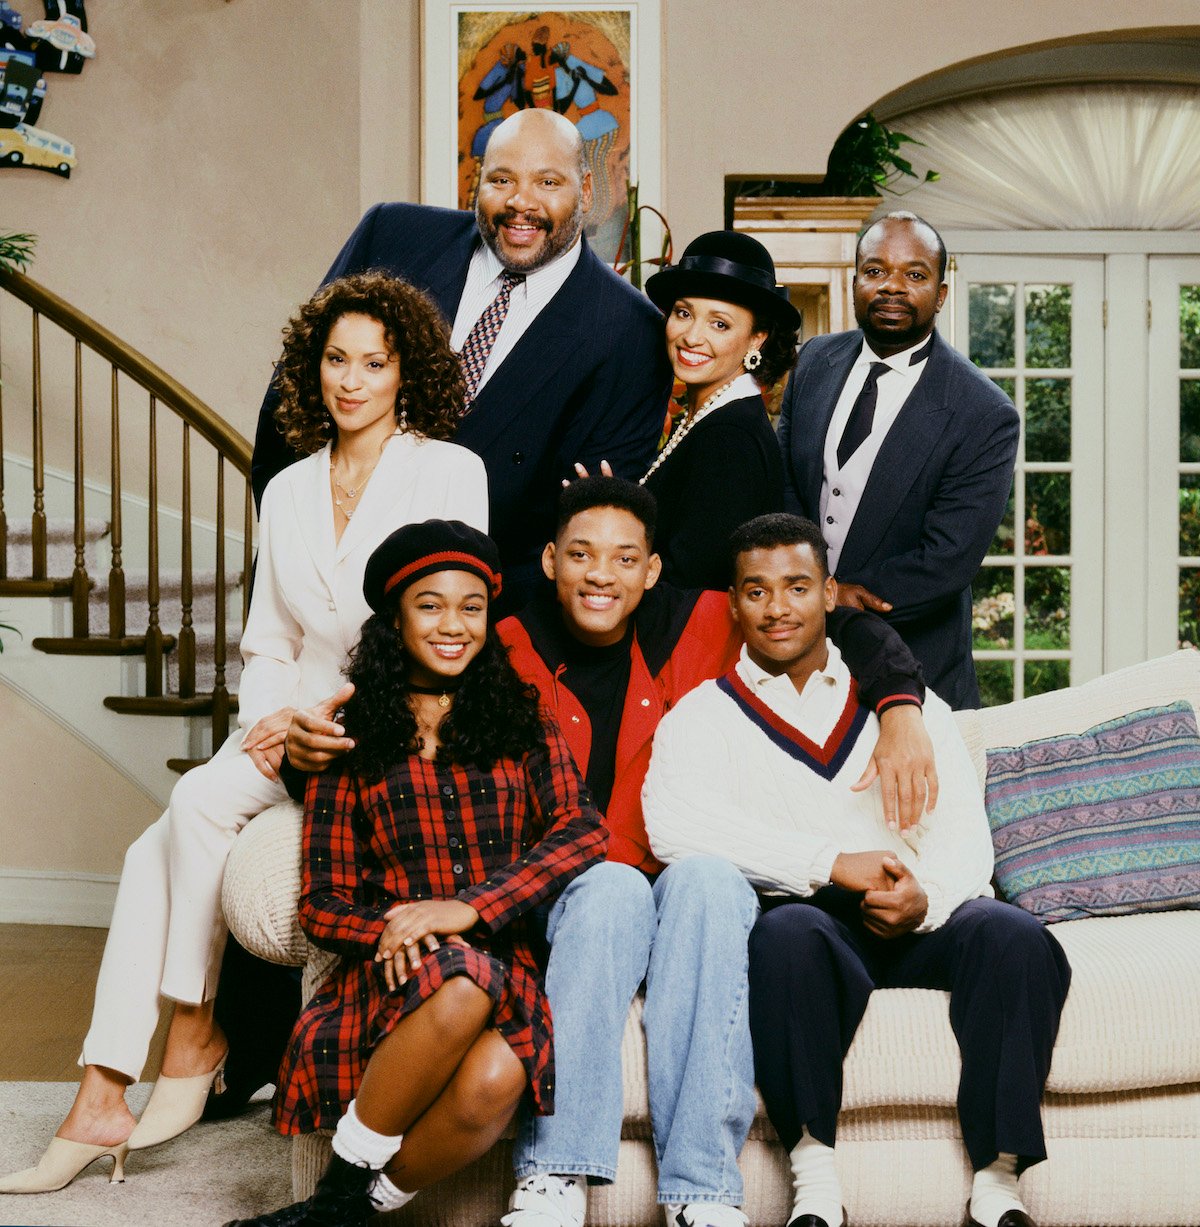 The cast of 'The Fresh Prince of Bel-Air'